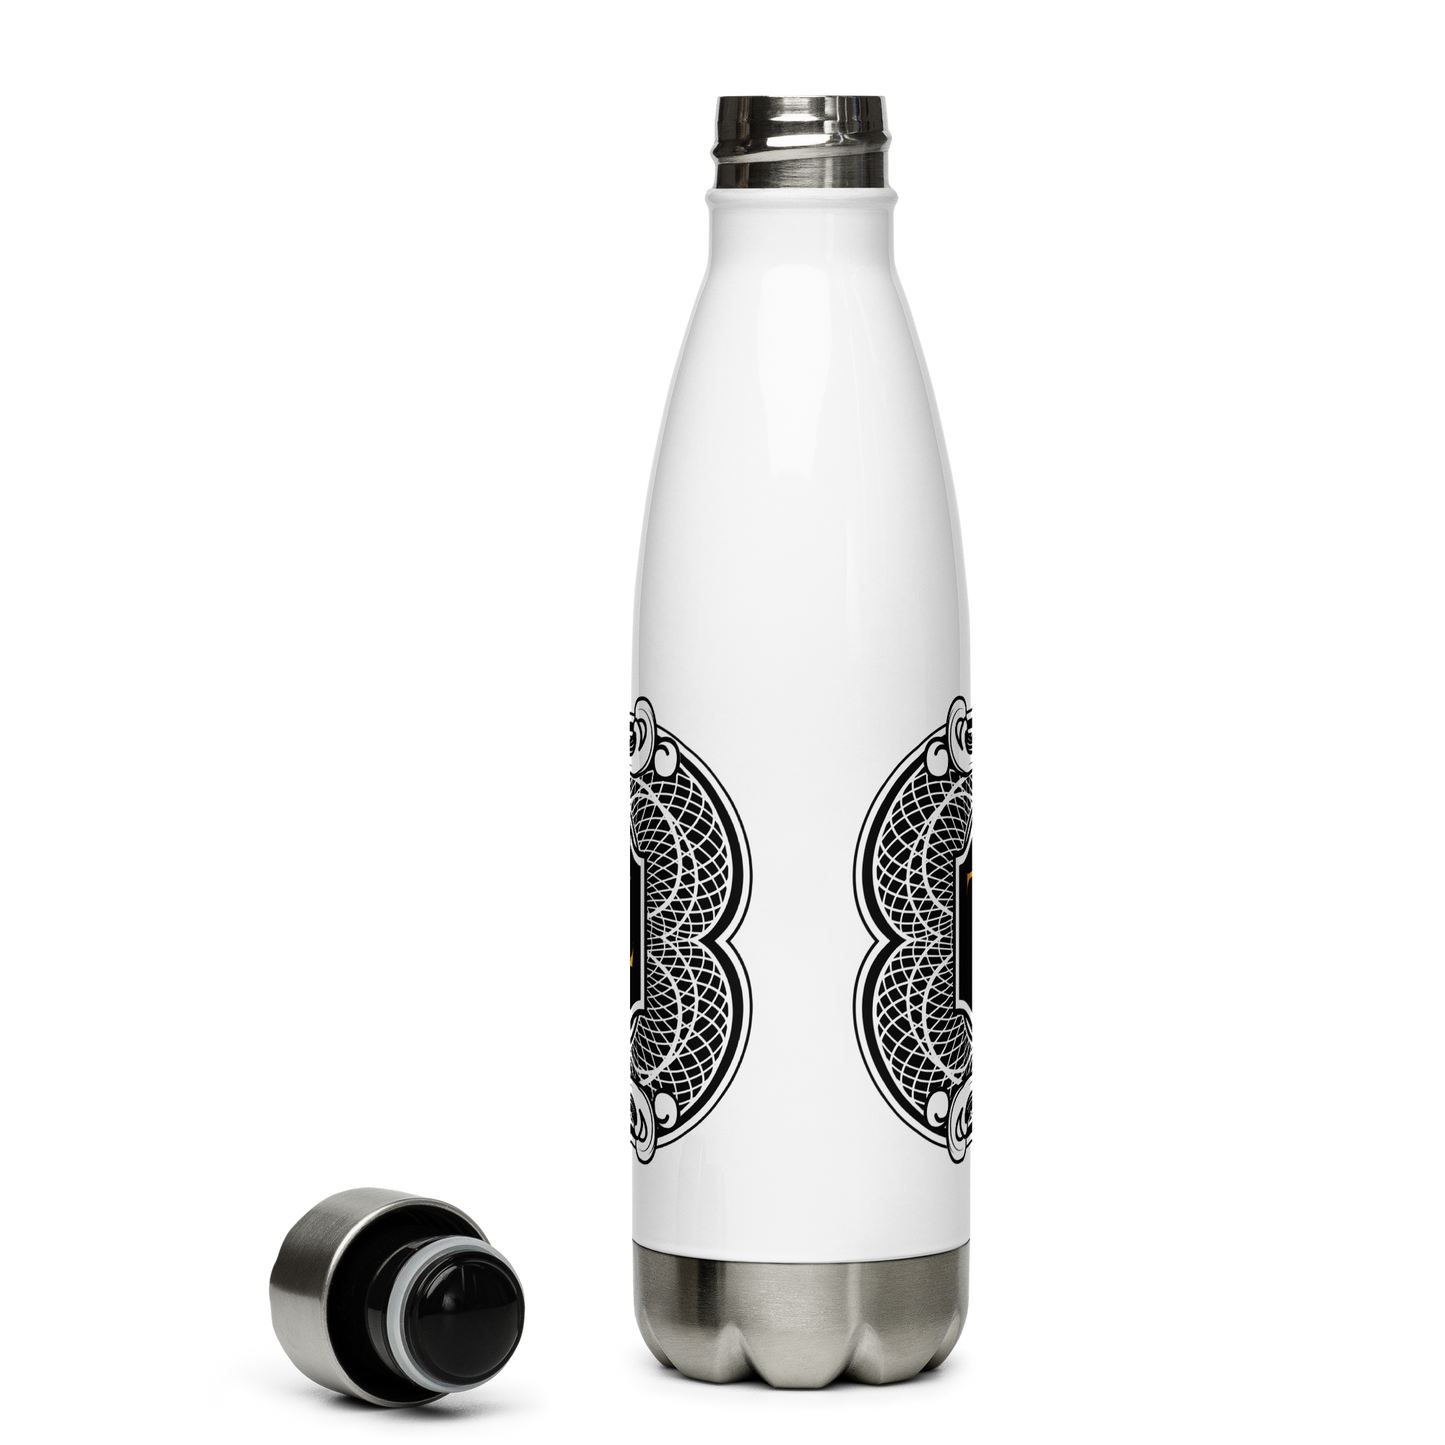 Tinfoil & Turmoil Brewery Stainless Steel Water Bottle 17oz | Printed Graphics